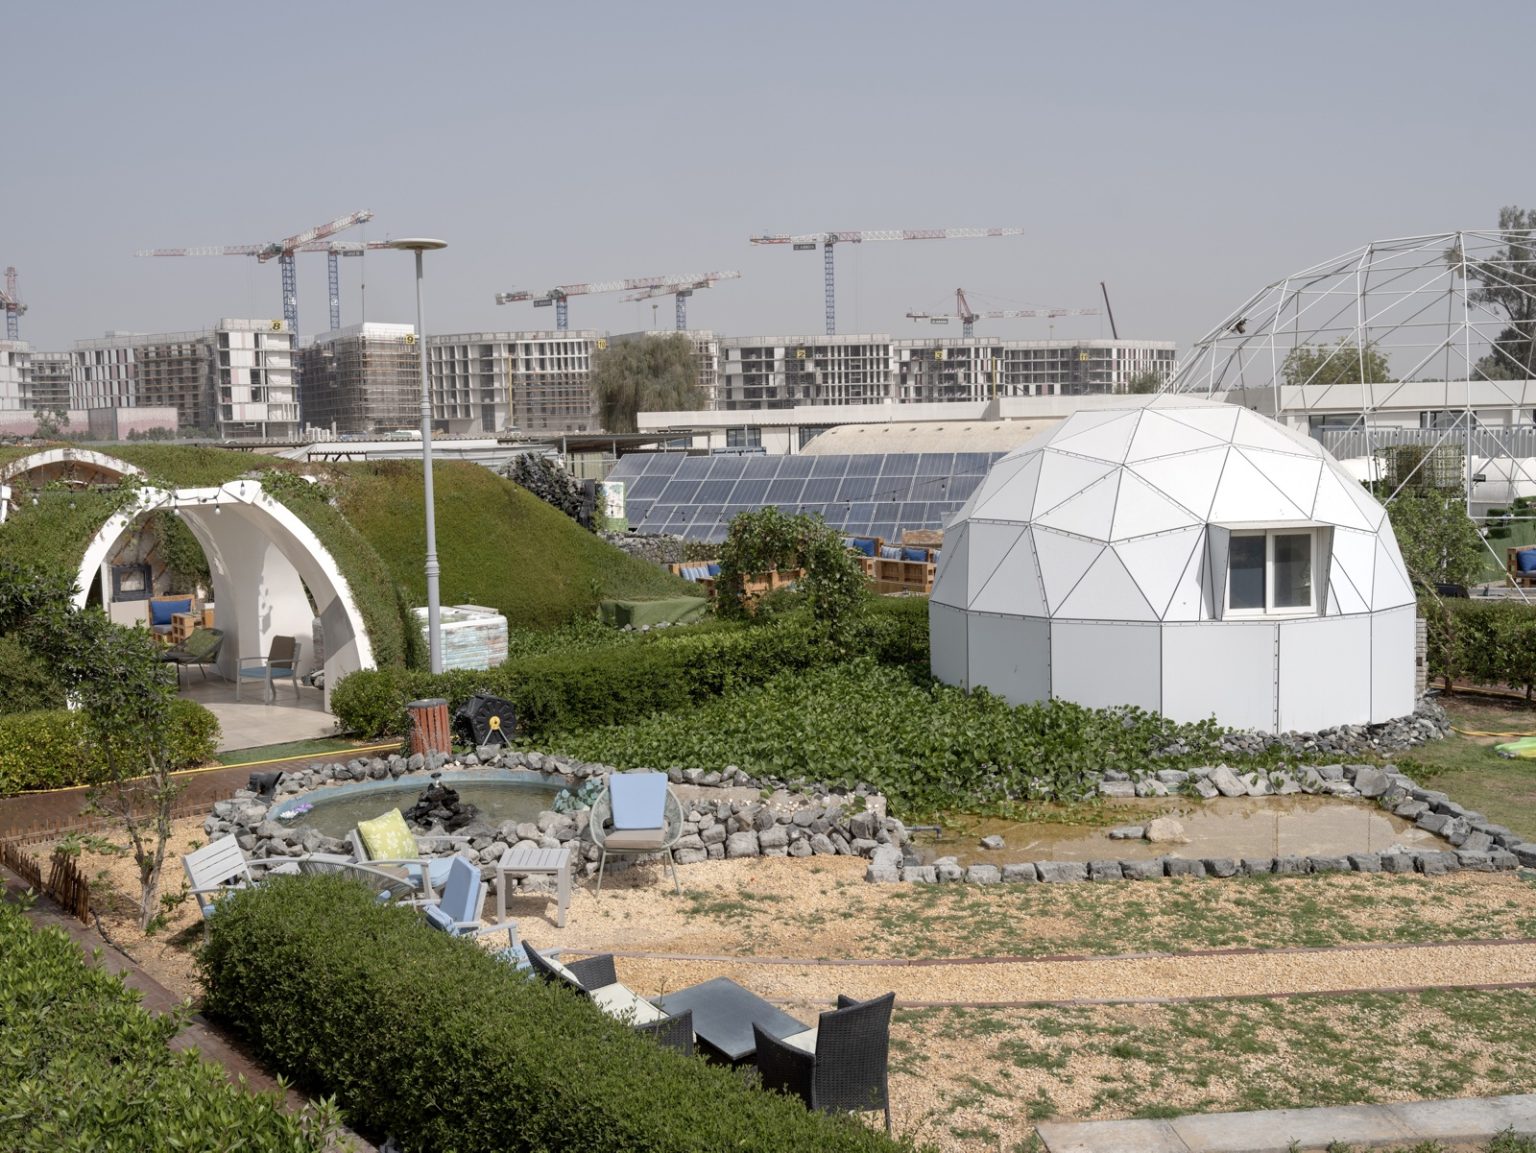 UAE, Green Dunes, 2022.
The Sharjah Research Technology and Innovation park is an ideas factory. Their CEO, Hussain Al Mahmoudi, has highlighted food security for UAE as one of the core motivations behind such ideas. In the centres sandy grounds. researchers have designed a huddle of indoor farms that can grow lettuce, vegetables and fruit. 

Made from a composite material that keeps out the blistering heat, the dome structures have the look of farming on Mars. This technology has been sold to other vertical farms in UAE. 


Emirati Arabi Uniti, Dune verdi, 2022.
Il parco di ricerca, tecnologia e innovazione di Sharjah è una fabbrica di idee. Il suo amministratore delegato, Hussain Al Mahmoudi, ha sottolineato che la sicurezza alimentare degli Emirati Arabi Uniti è una delle motivazioni principali alla base di queste idee. Nel terreno sabbioso del centro, i ricercatori hanno progettato un gruppo di fattorie al coperto in grado di coltivare lattuga, verdure e frutta. 

Realizzate con un materiale composito che tiene lontano il caldo torrido, le strutture a cupola hanno l'aspetto di un'agricoltura su Marte. Questa tecnologia è stata venduta ad altre fattorie verticali negli Emirati Arabi Uniti.